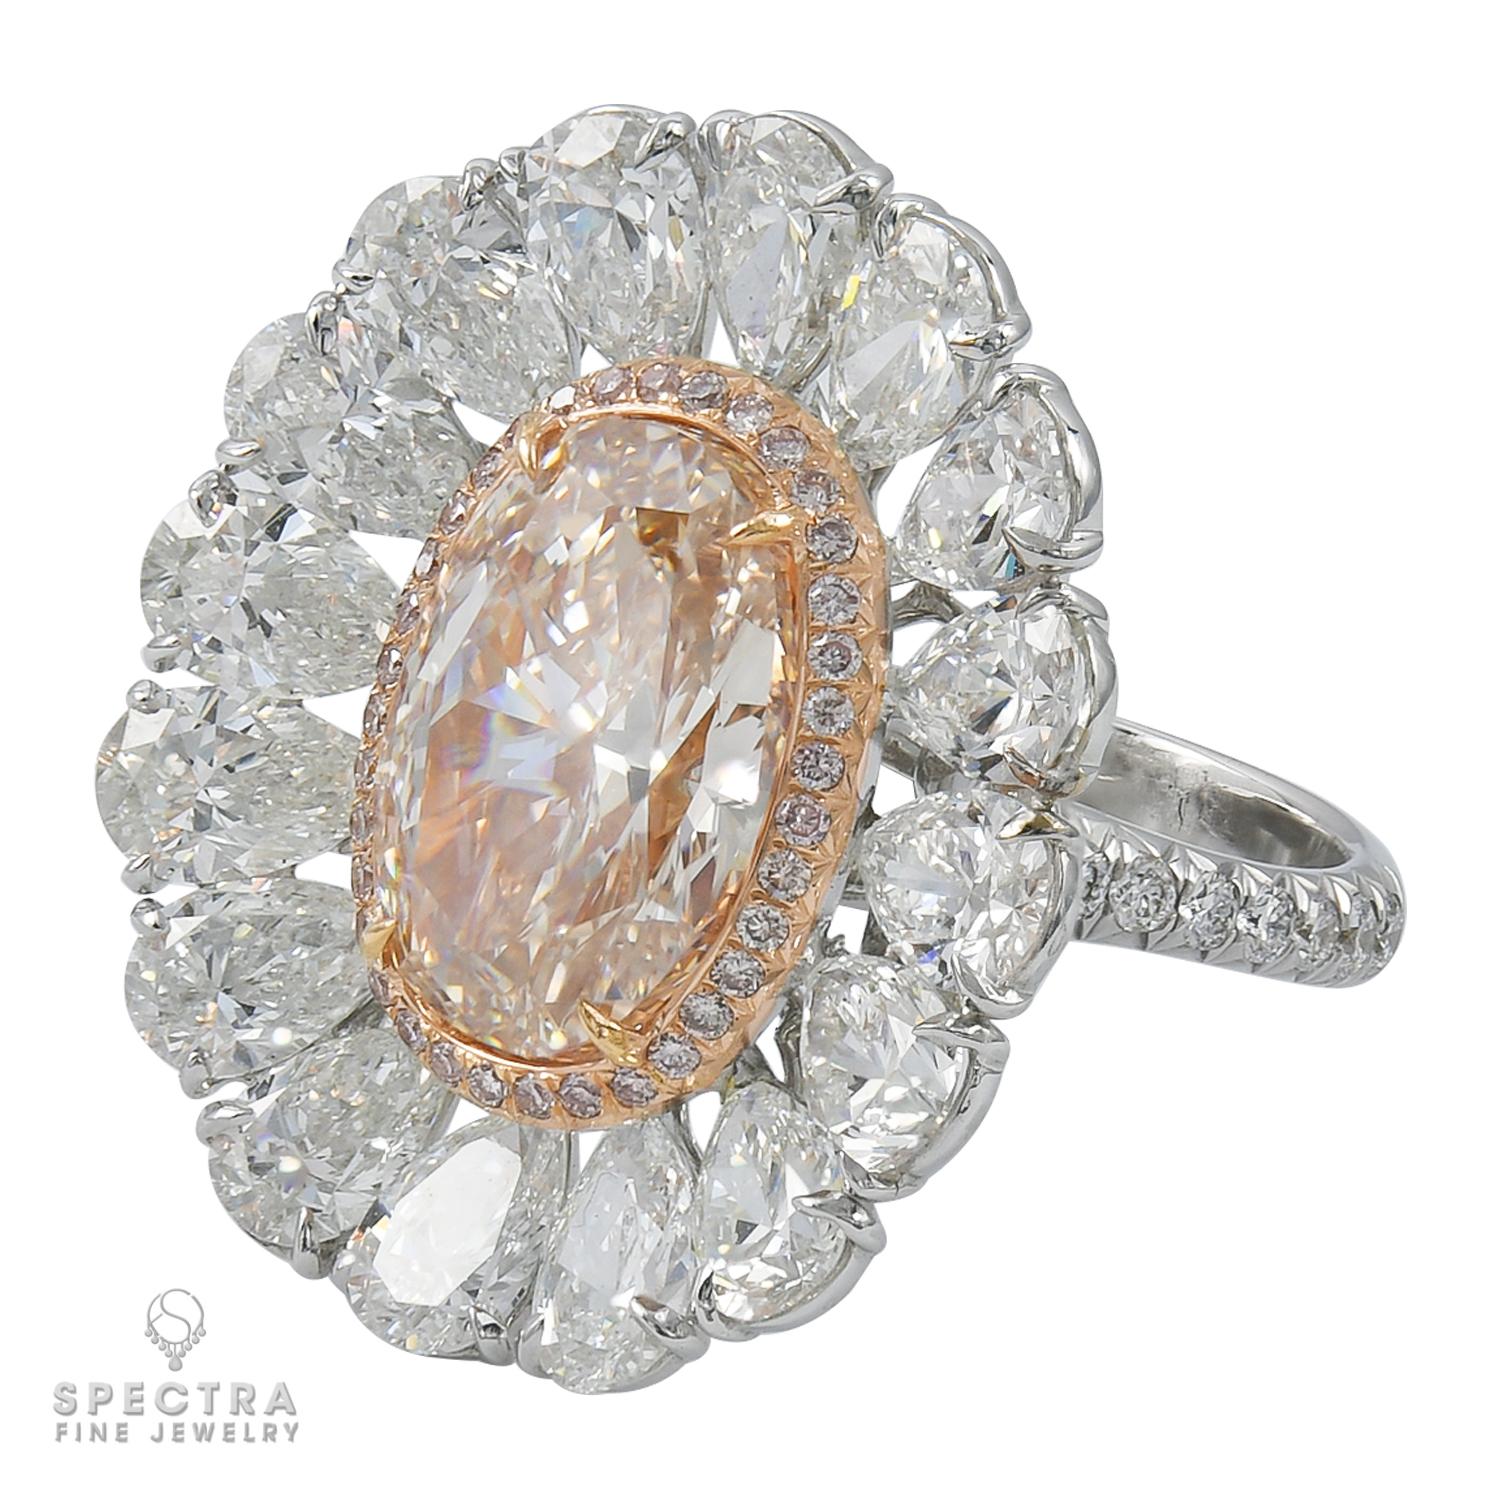 A stunning ring embellished with a 6.27 carat fancy pink-brown oval diamond and 16 pear shape diamonds weighing 6.63 carats. Pave diamonds on the band weighing 0.75 carats. Total weight of the diamonds is 13.65 carats.
The center diamond is